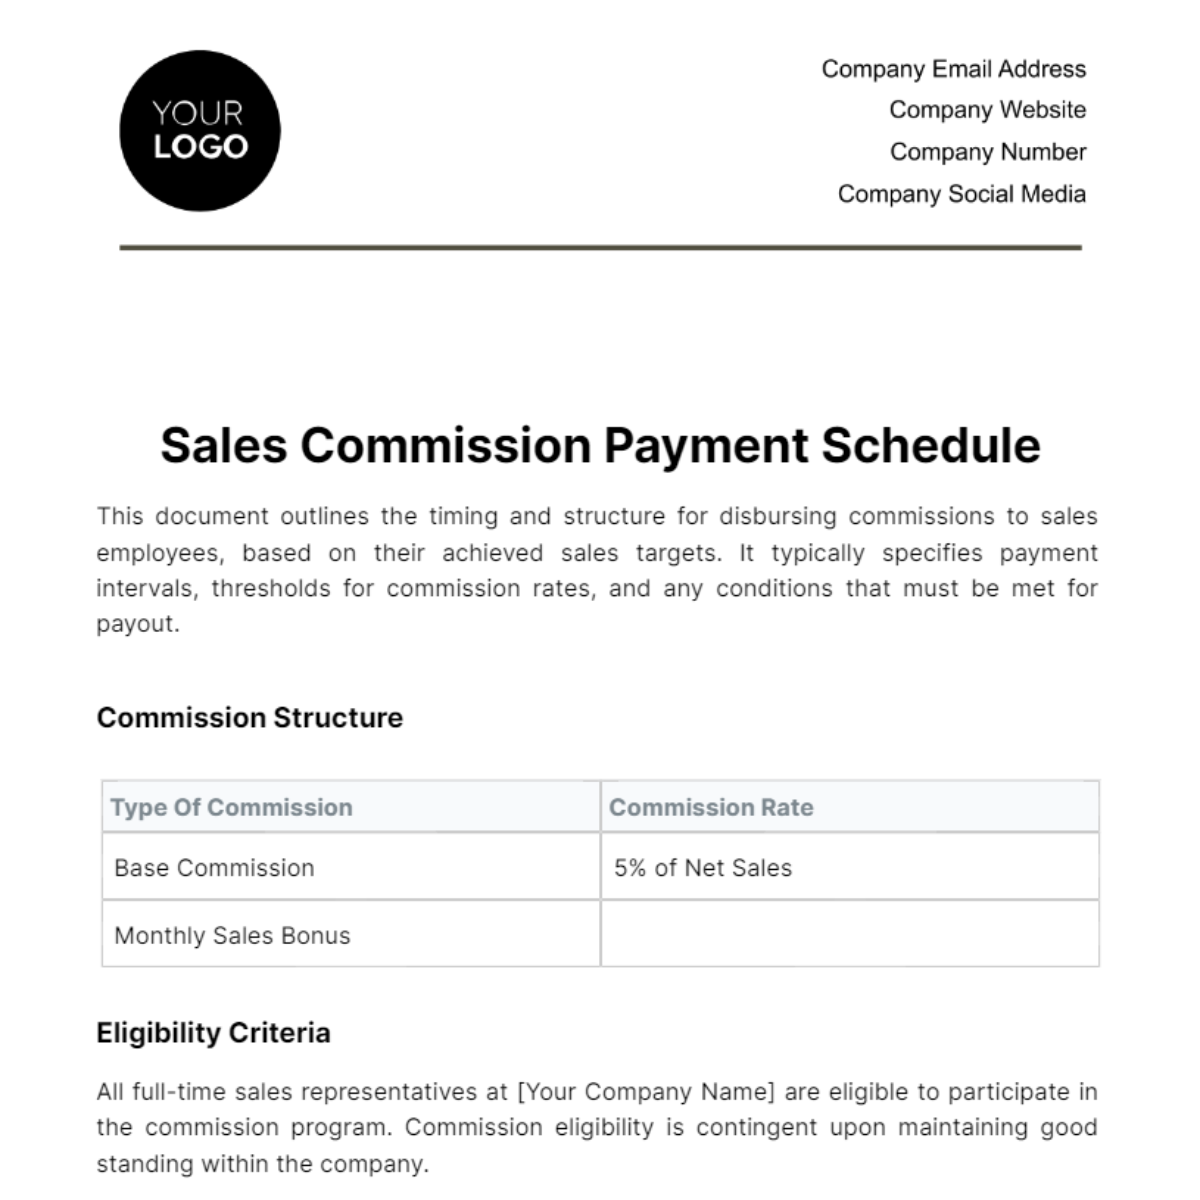 Sales Commission Payment Schedule Template